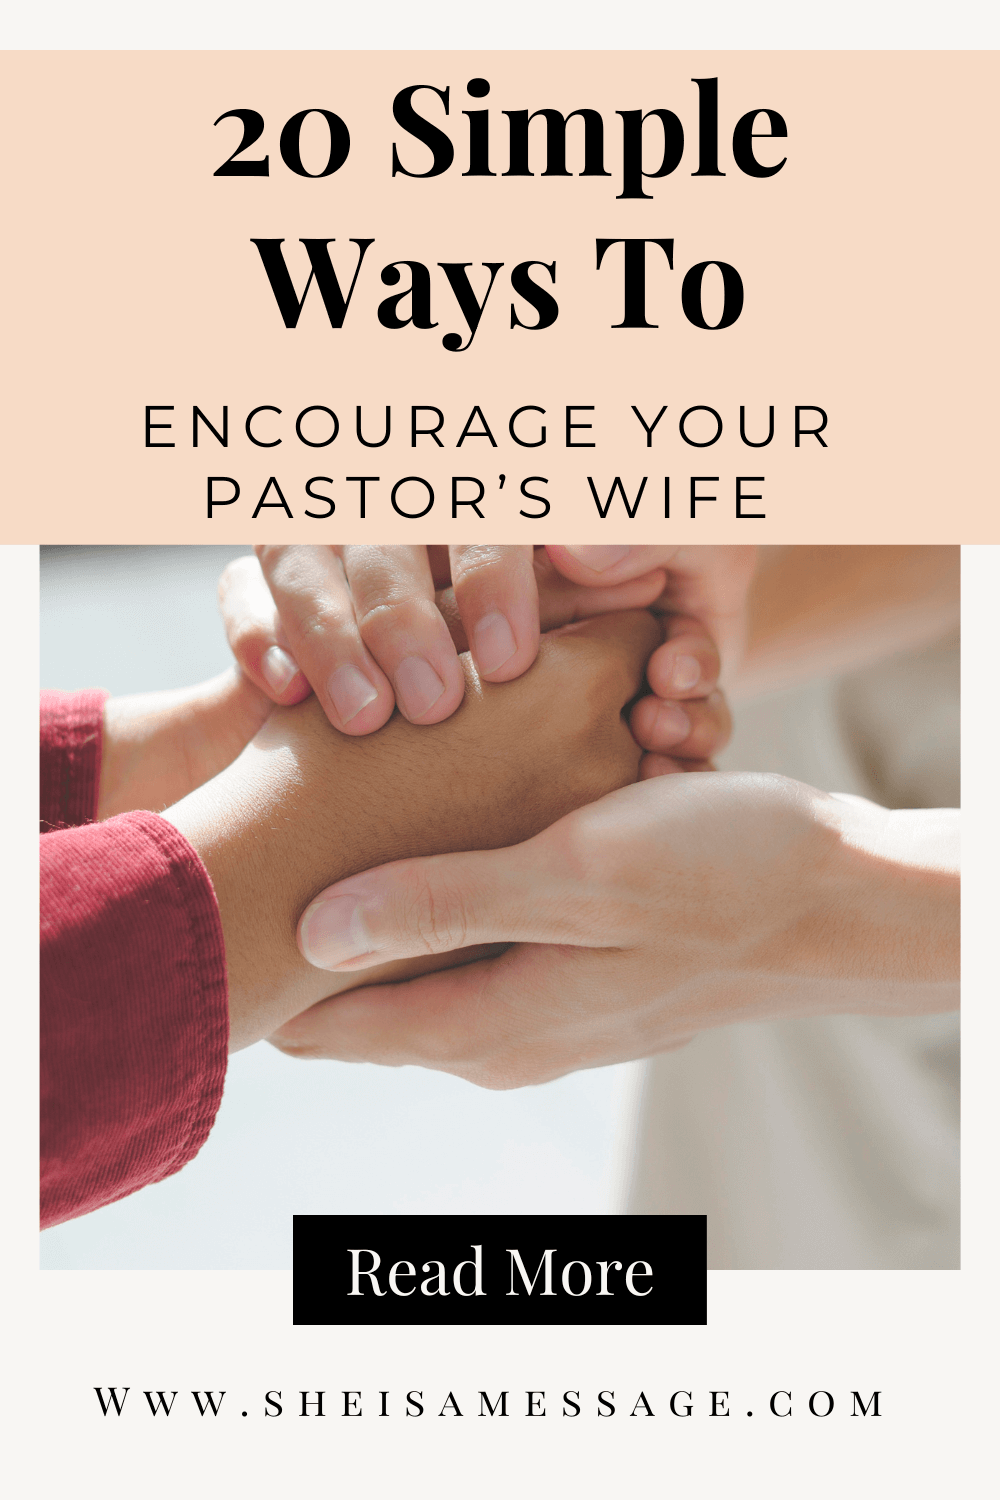 20 Simple Ways To Encourage Your Pastor's Wife Today 2